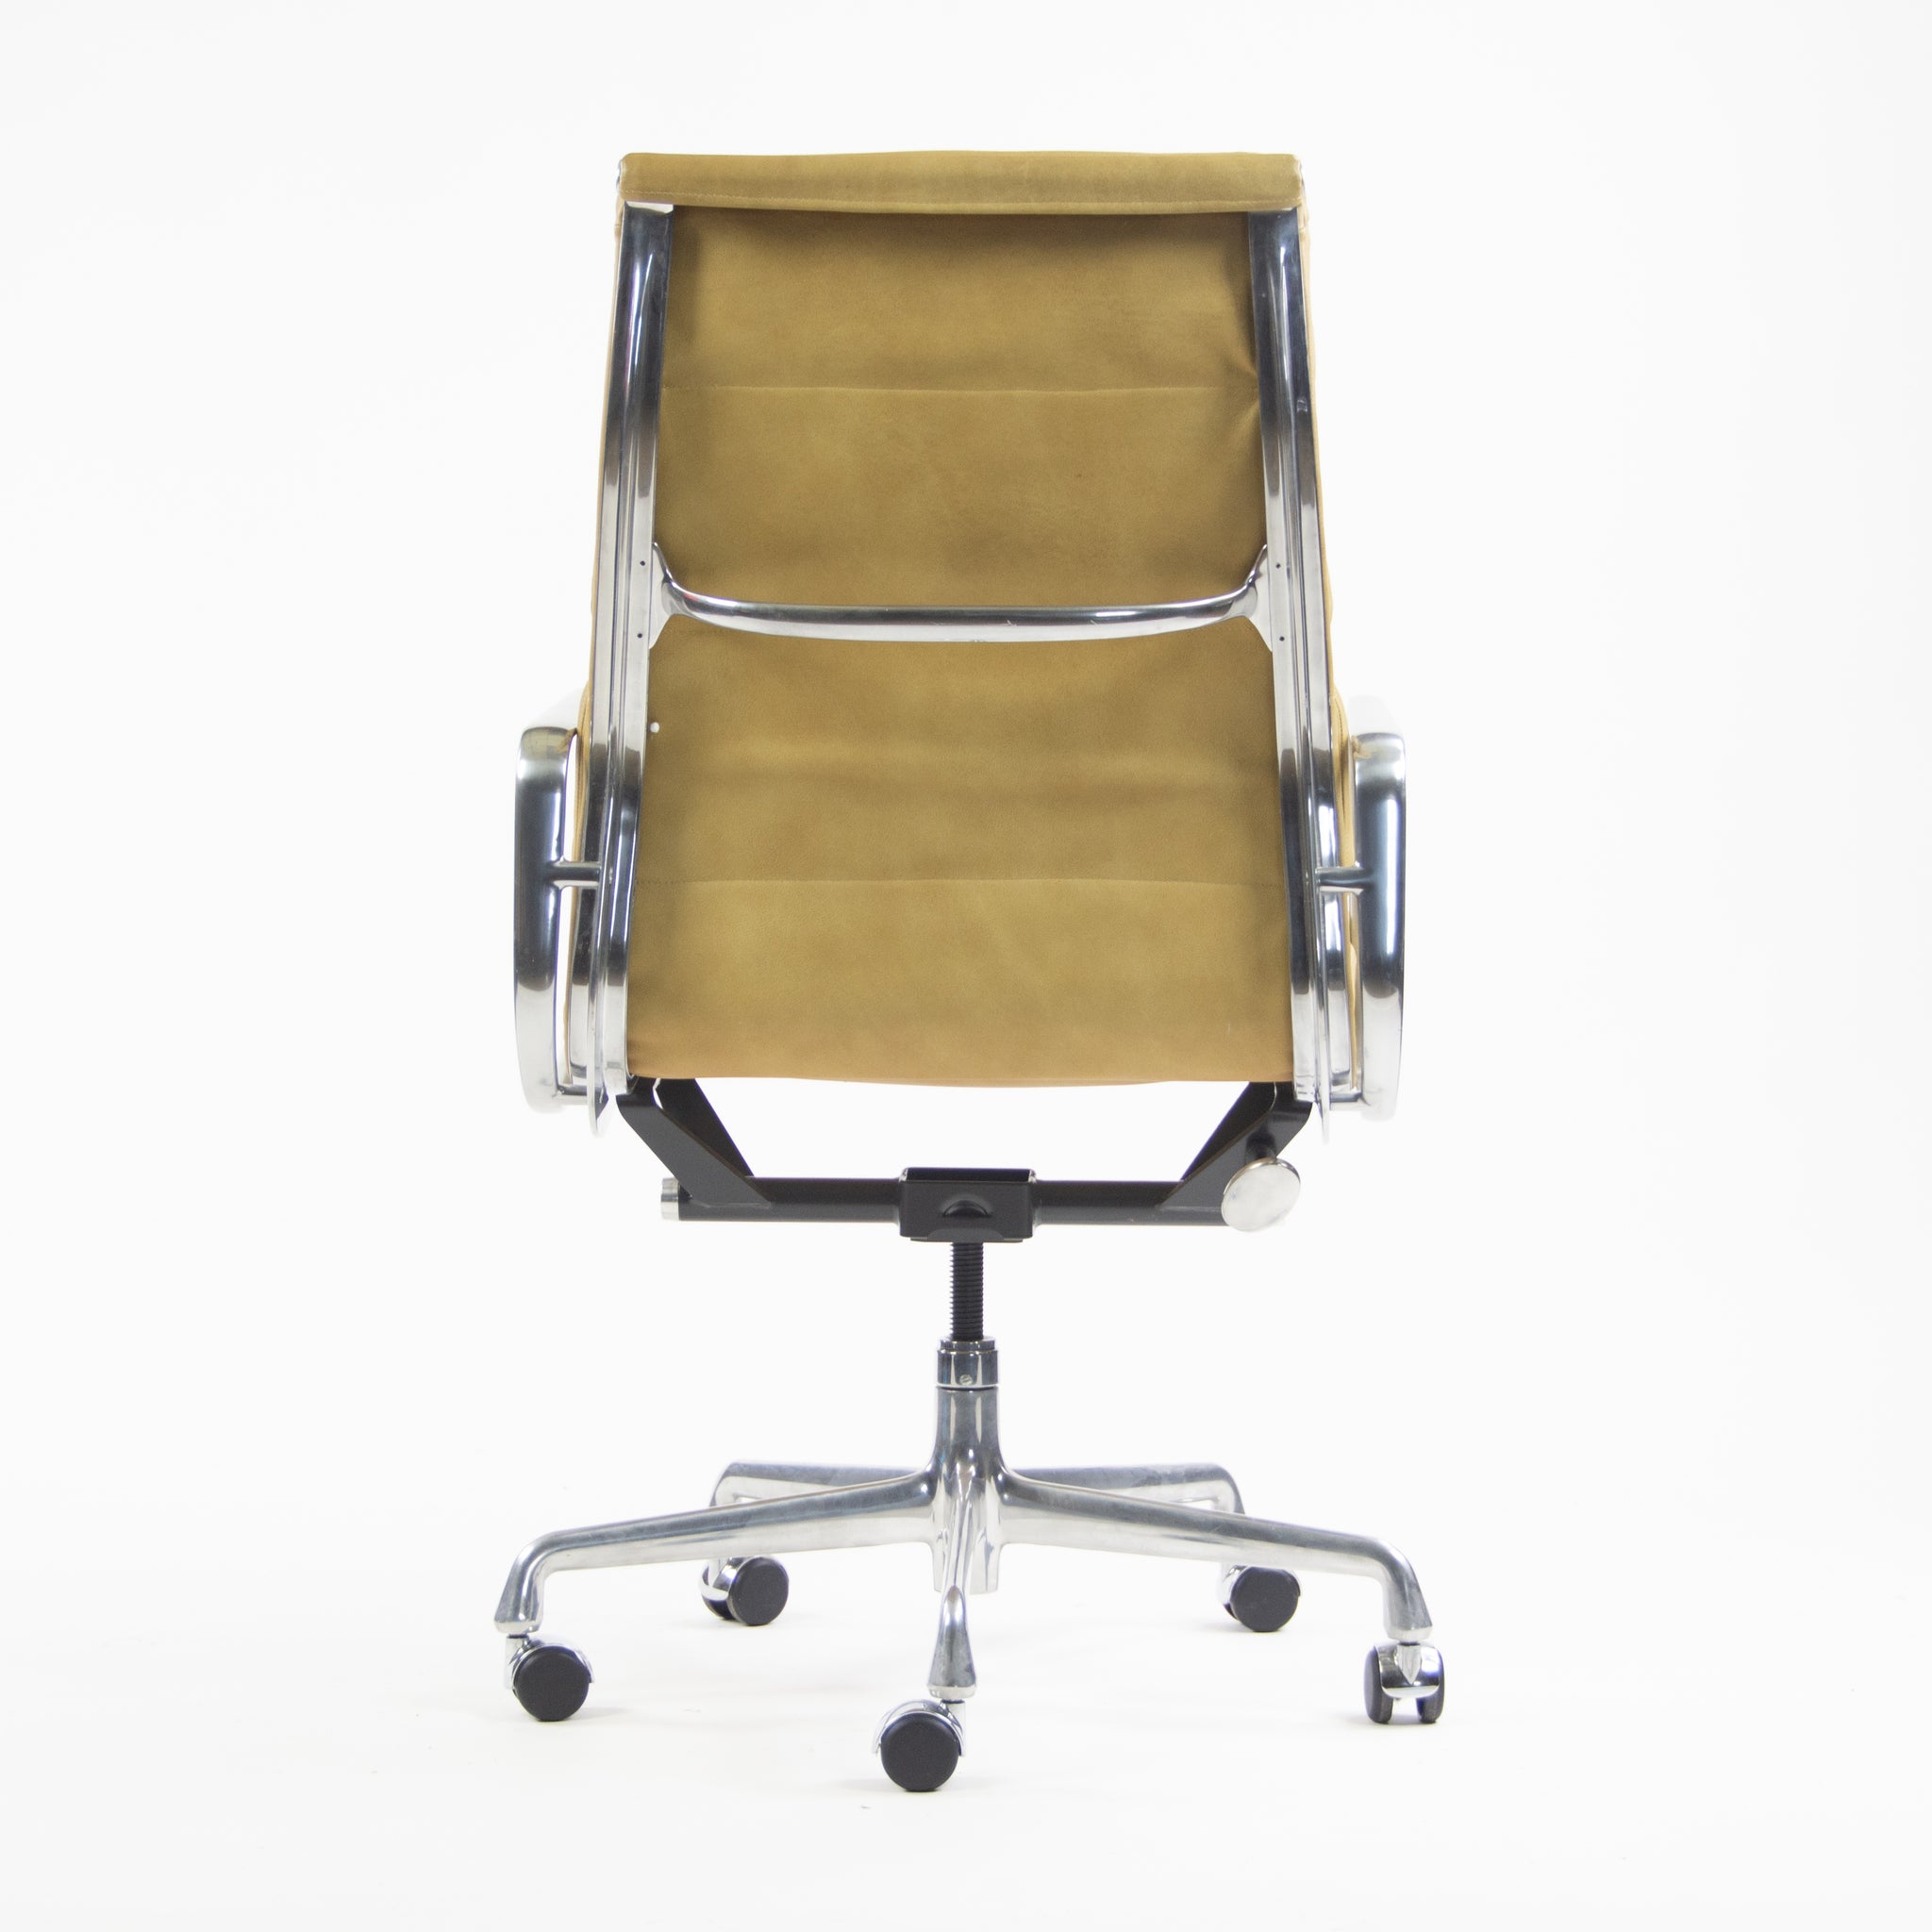 SOLD Herman Miller Eames High Soft Pad Aluminum Executive Desk Chairs 2x Available Tan